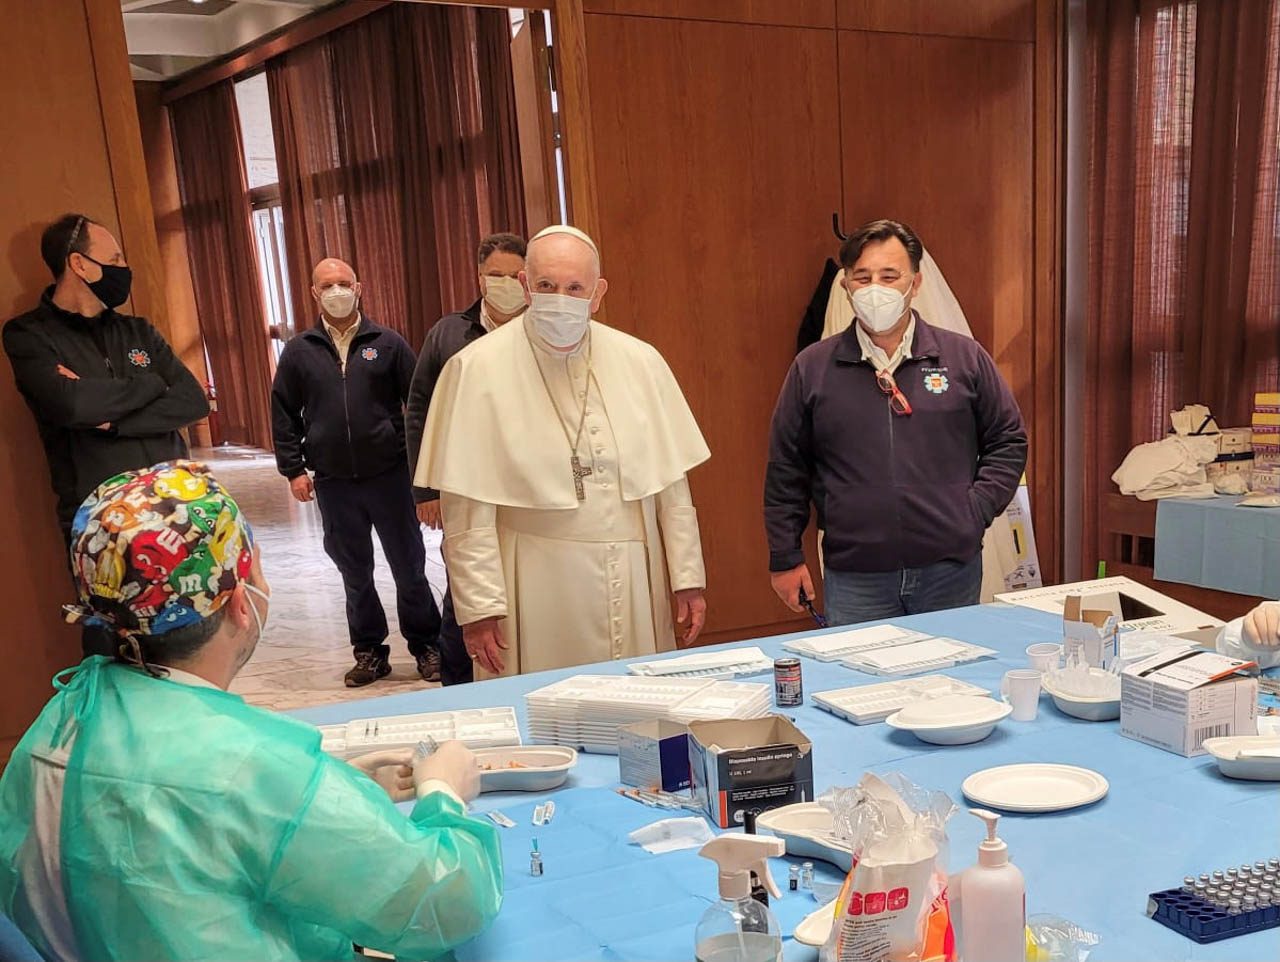 Pope makes surprise visit to homeless getting COVID-19 vaccine in Vatican